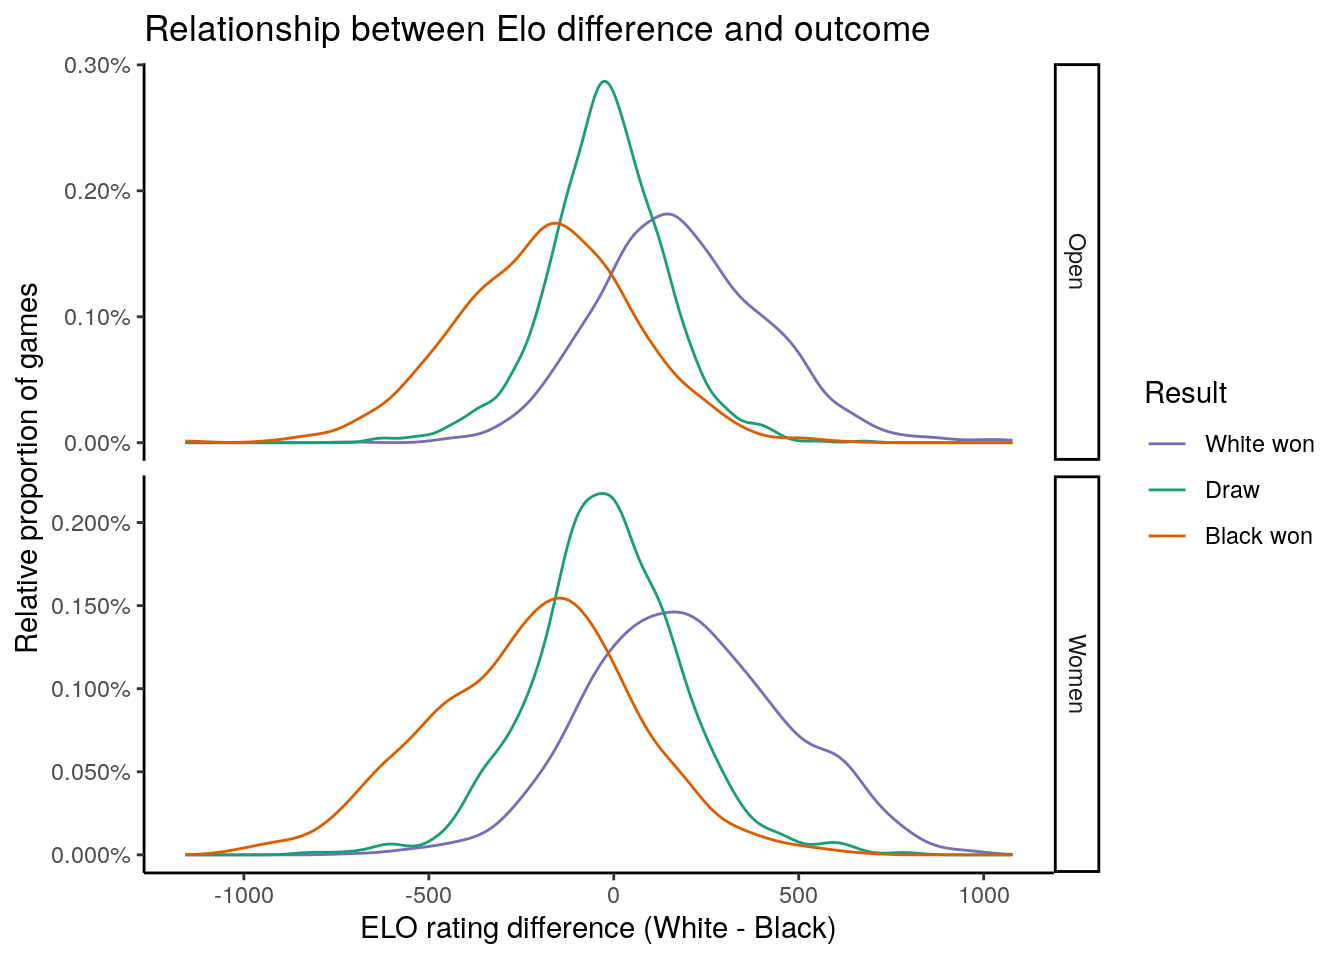 Relationship between Elo difference and outcome